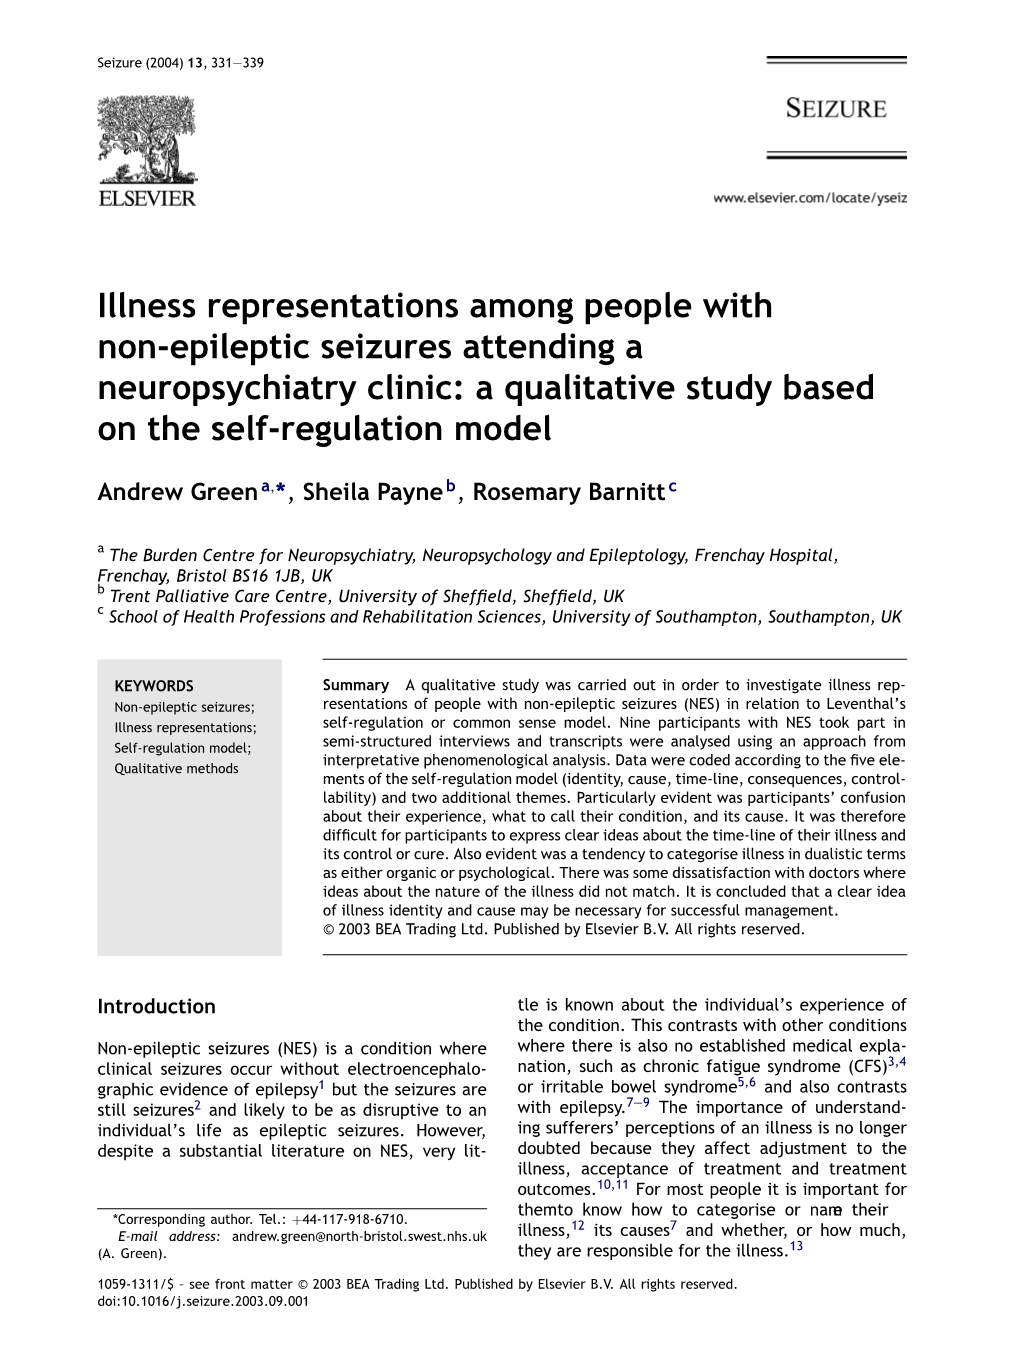 Illness Representations Among People with Non-Epileptic Seizures Attending a Neuropsychiatry Clinic: a Qualitative Study Based on the Self-Regulation Model